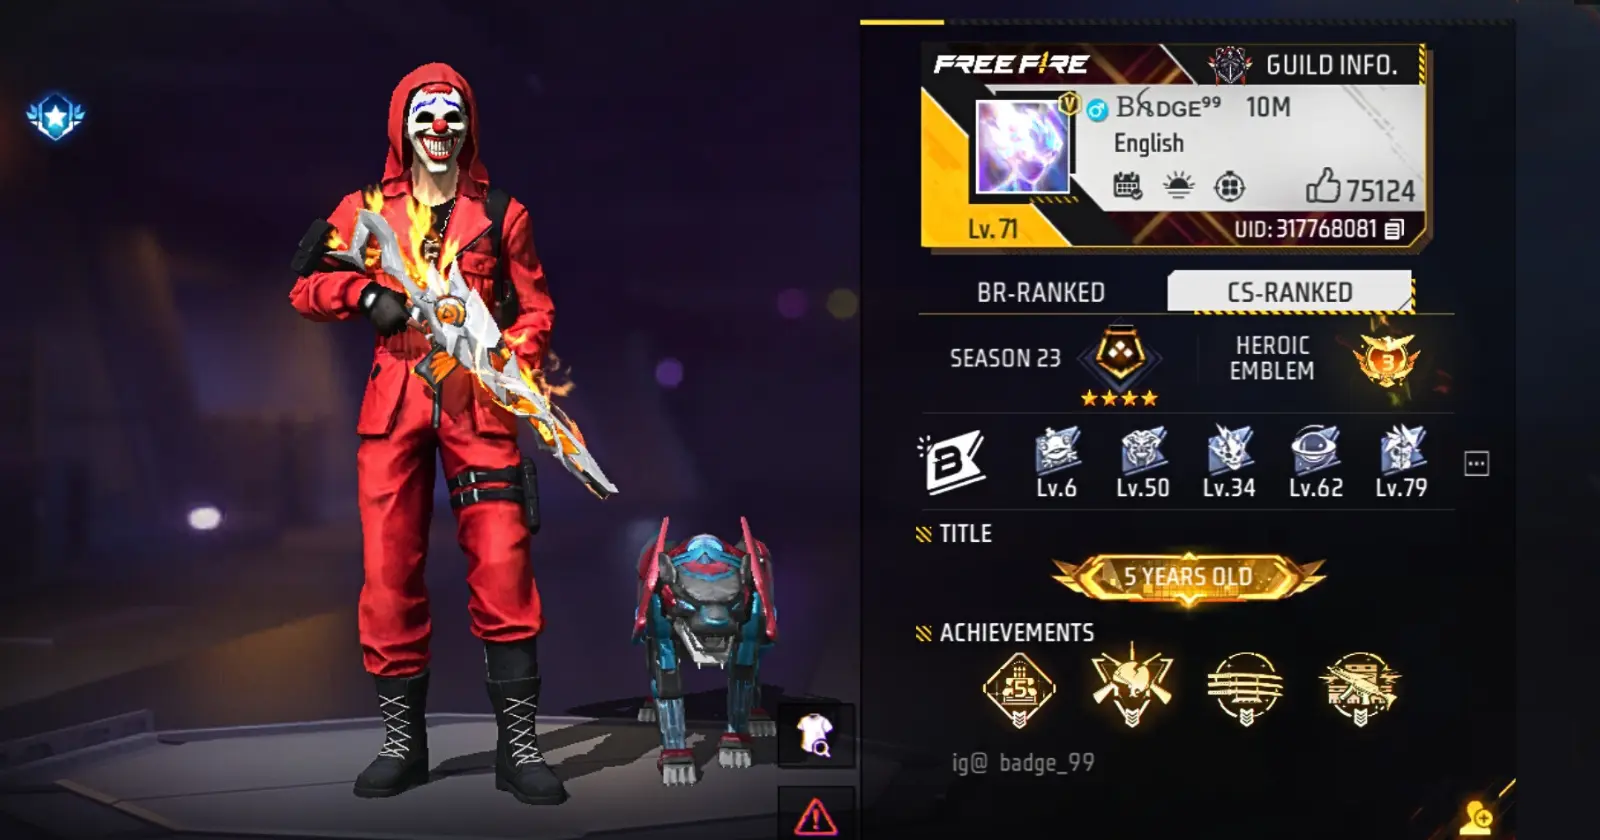 A character wearing a red outfit represents the Badge 99 player. His Free Fire uid and game statistics are displayed on the right